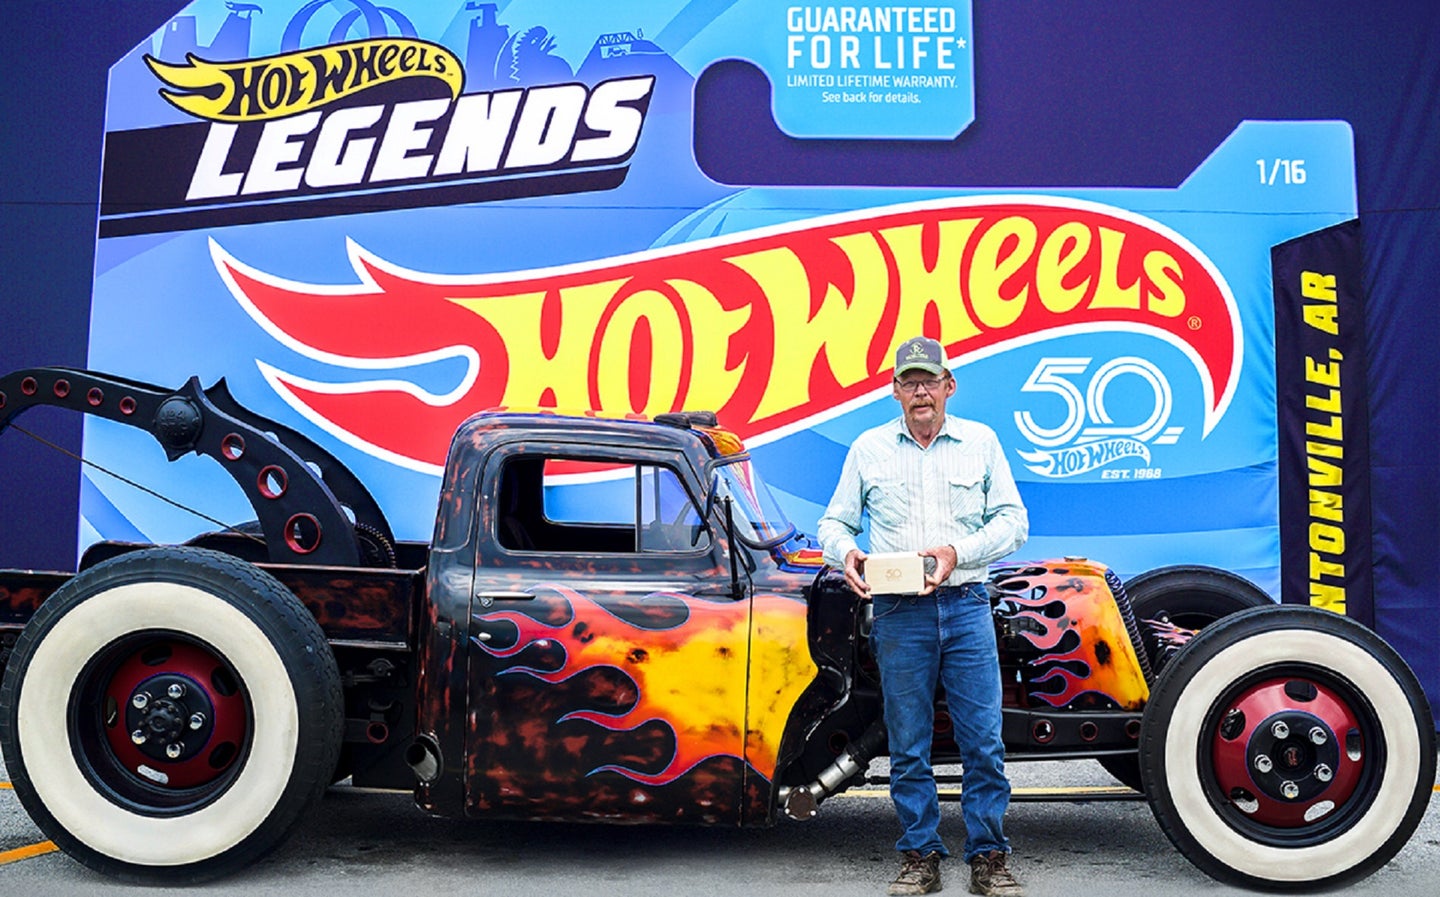 The Hot Wheels Legends Tour Is Headed to 18 Cities Across the US in 2019